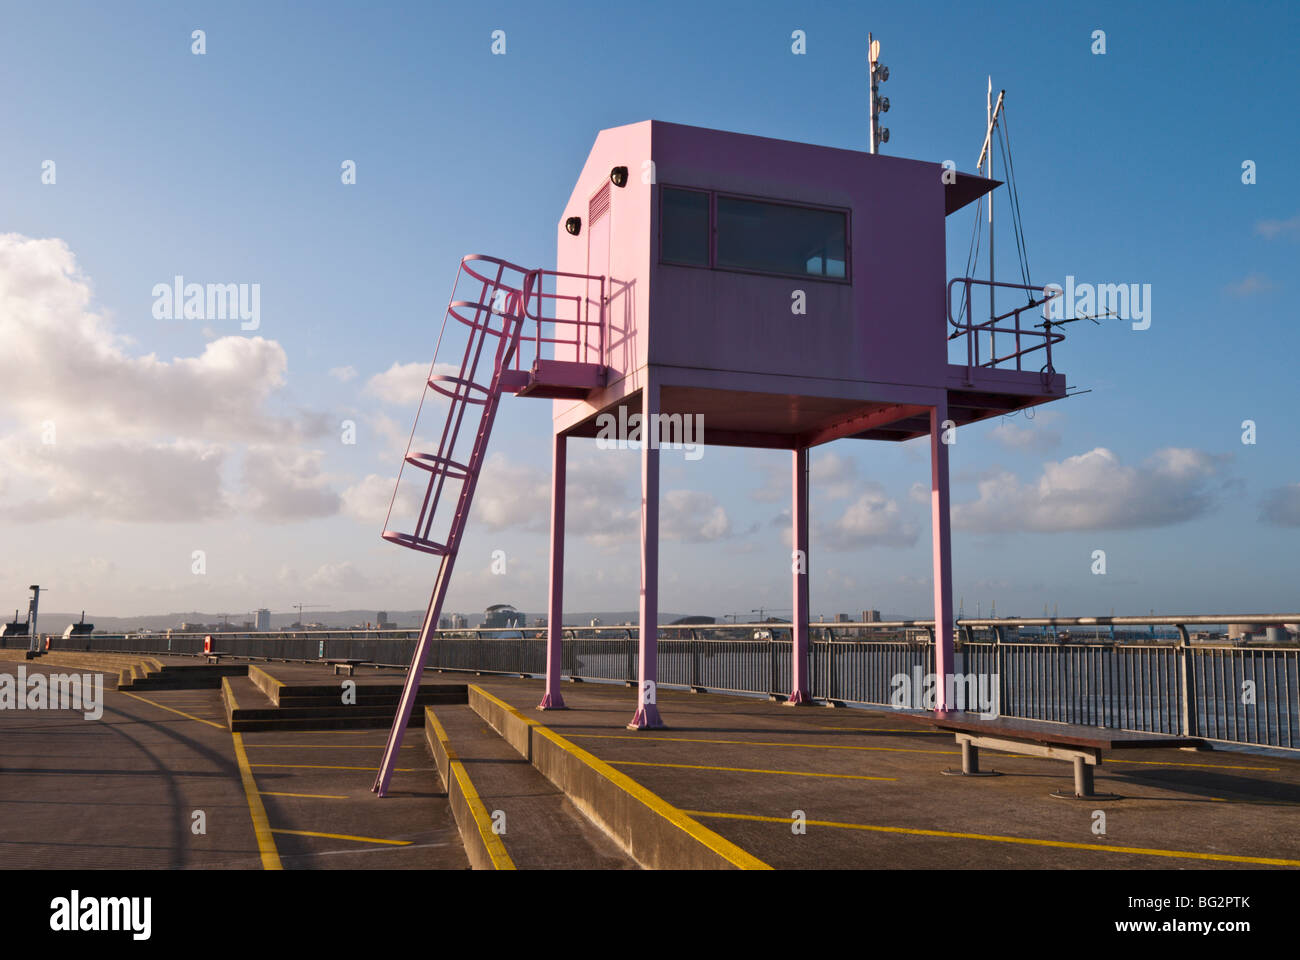 A pink watch tower at Cardiff Bay, Wales, Cardiff. Stock Photo